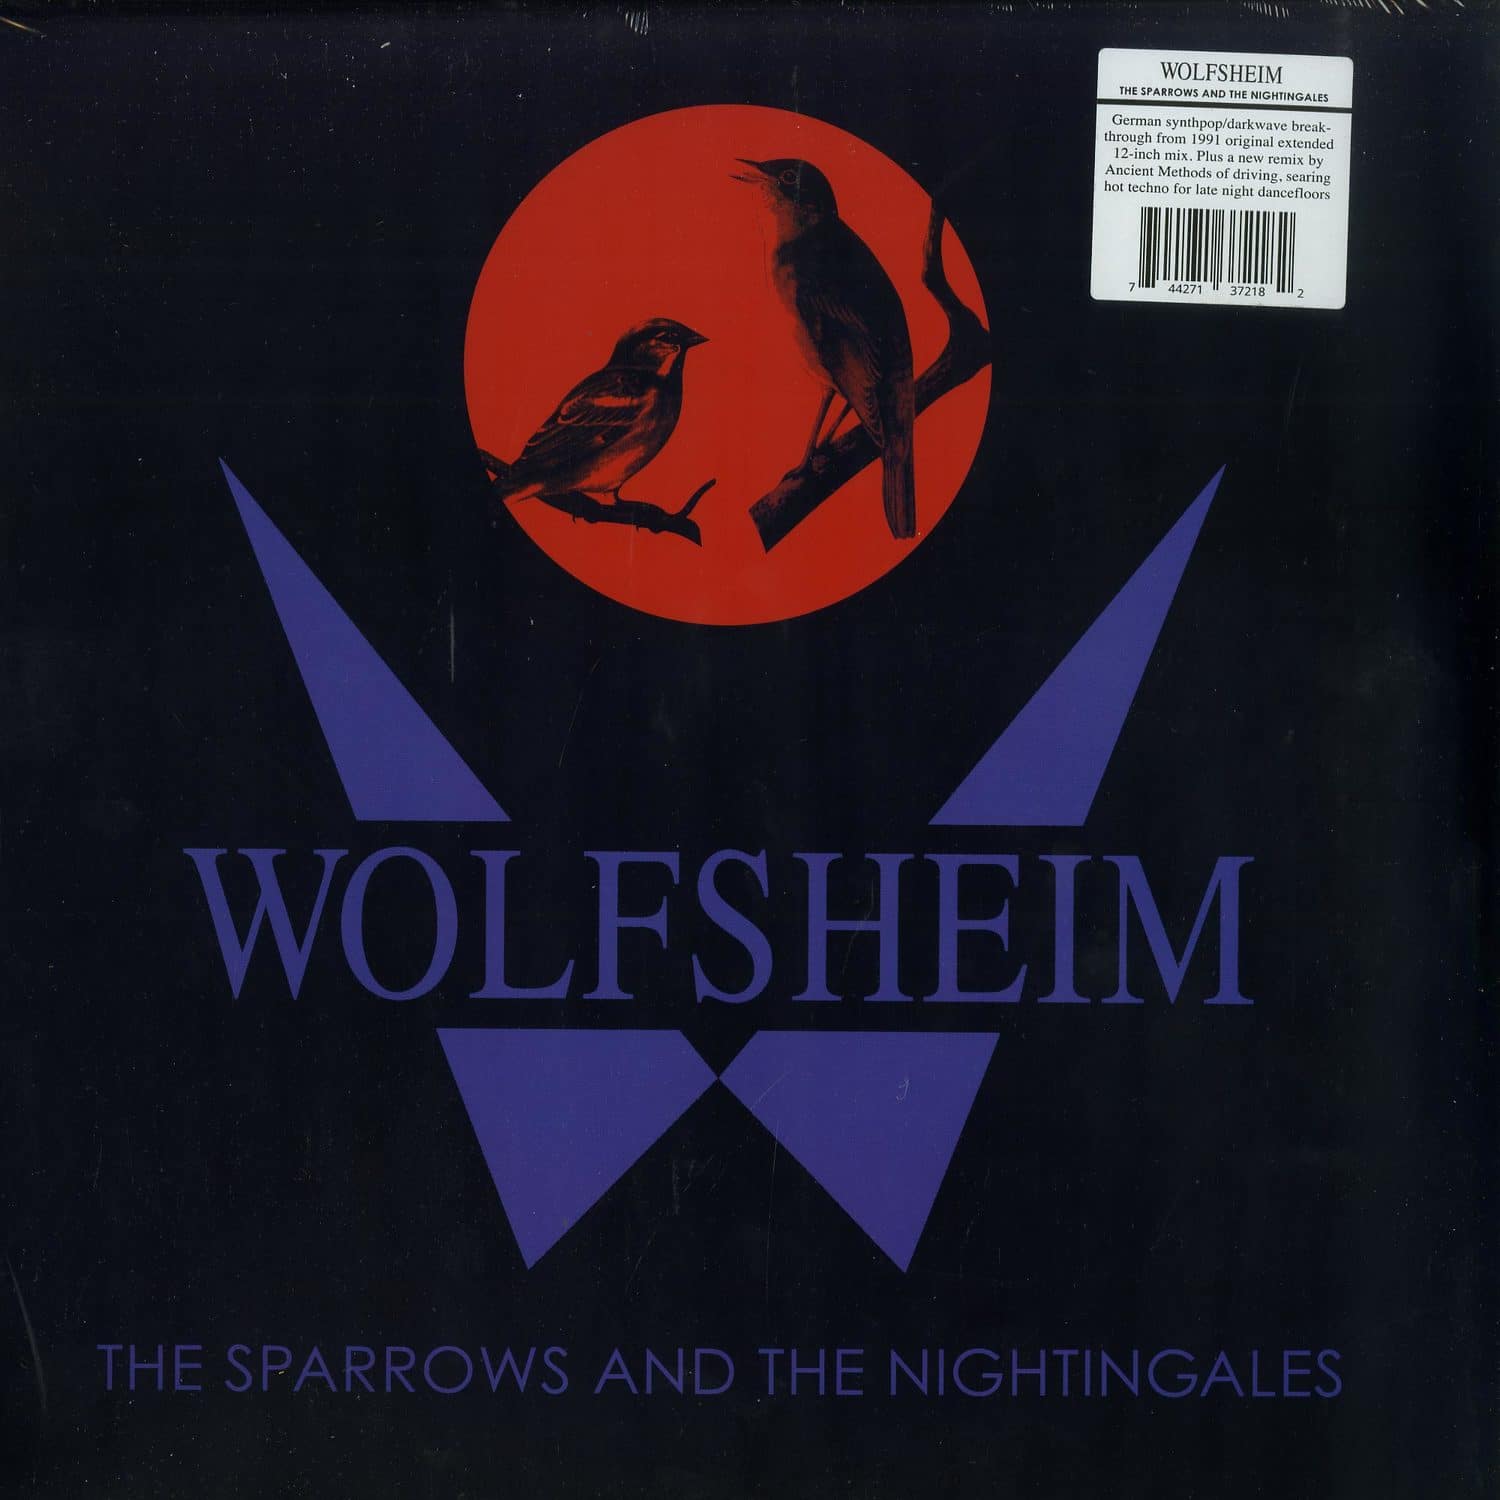 Wolfsheim - THE SPARROWS AND THE NIGHTINGALES